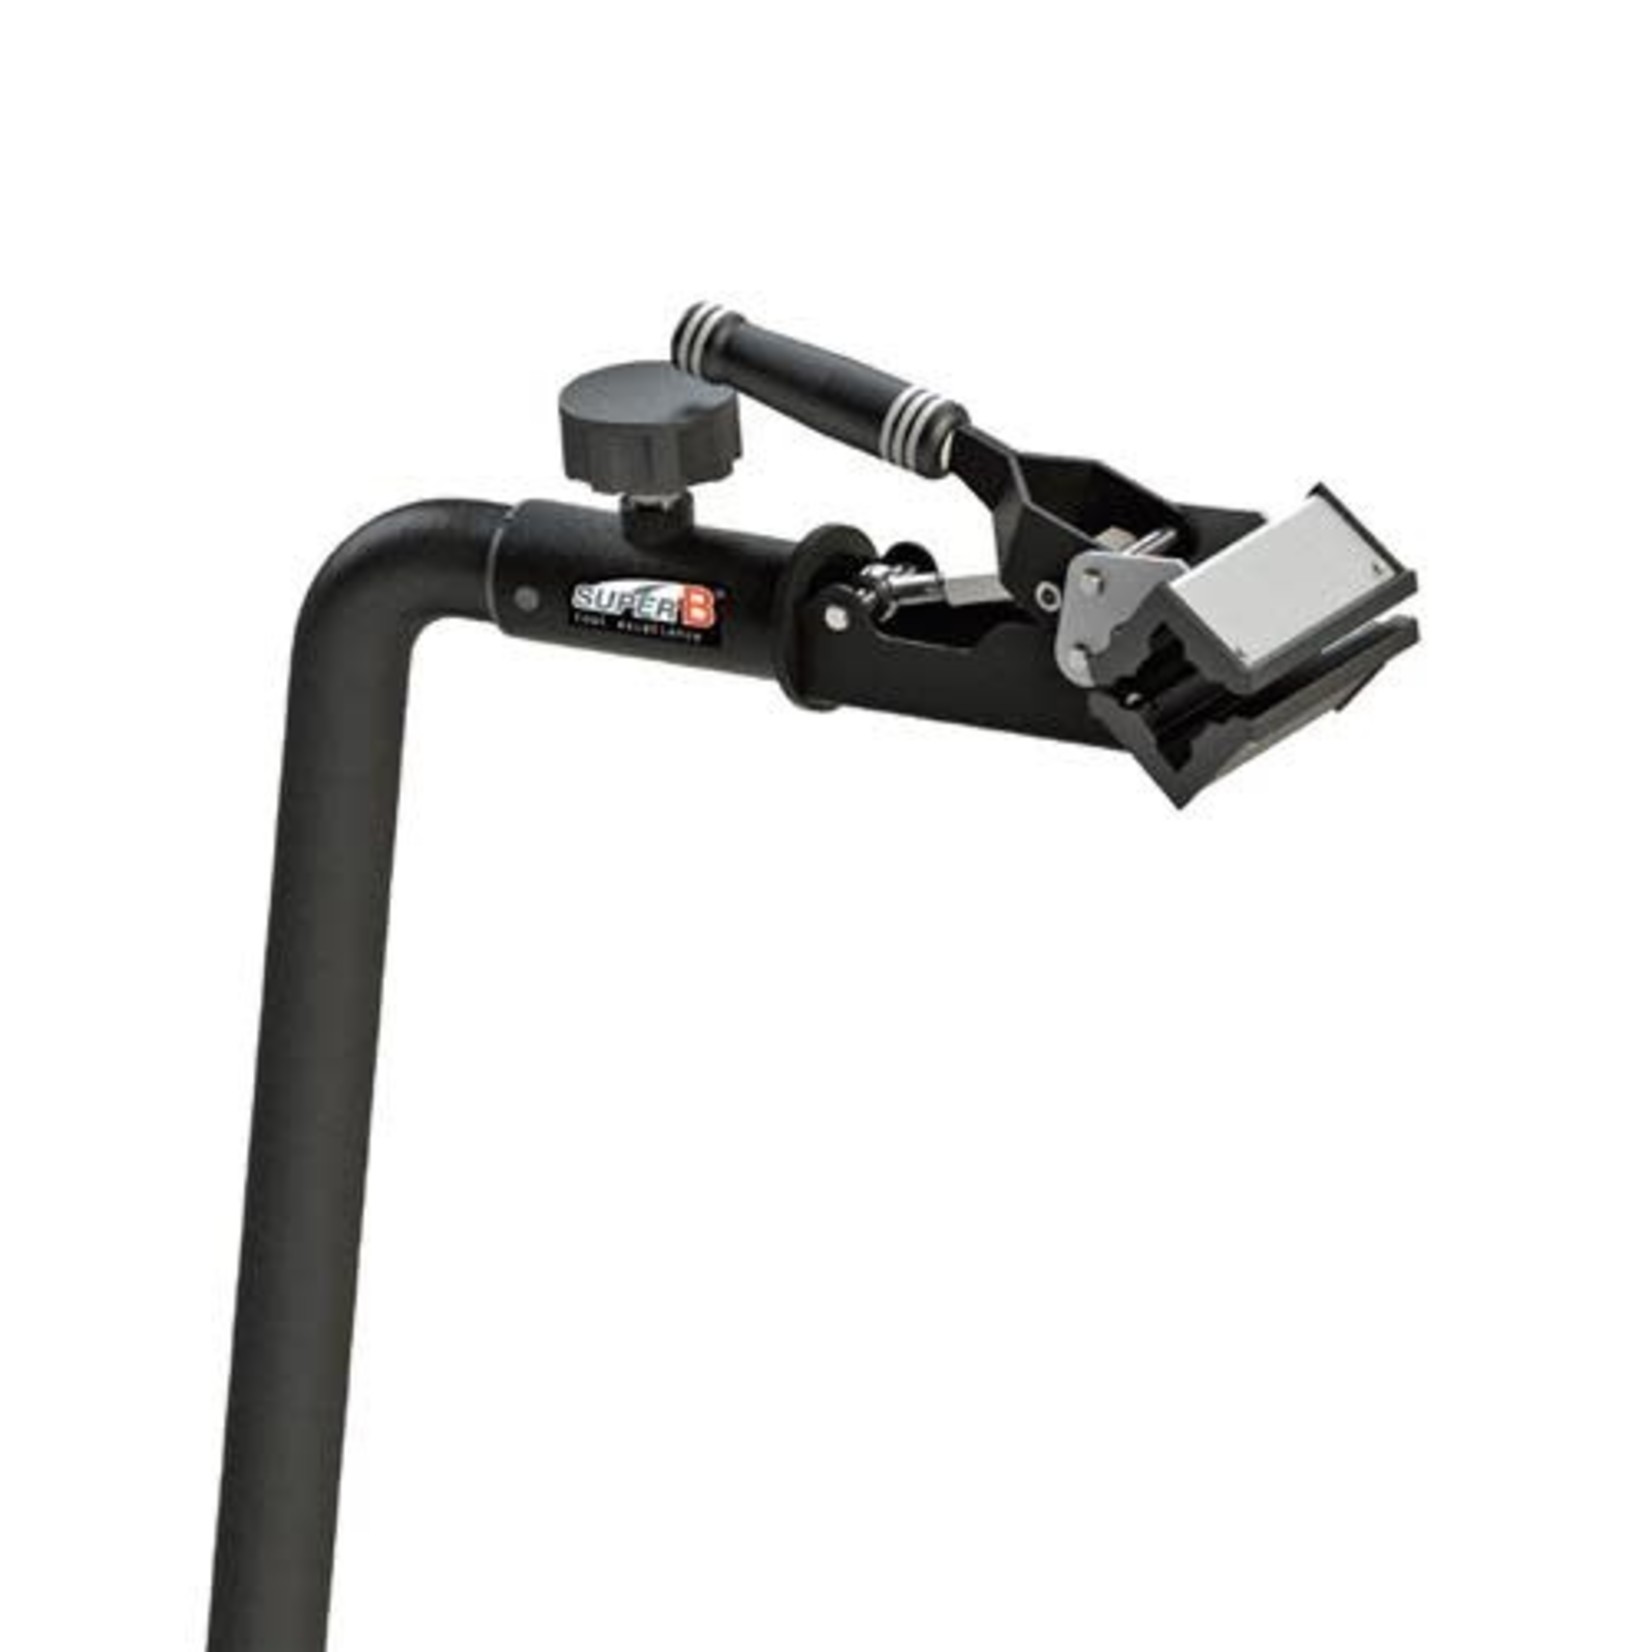 Super B SuperB Essential Work Stand For E-Bike - Adjustable In Height - 105 - 150cm